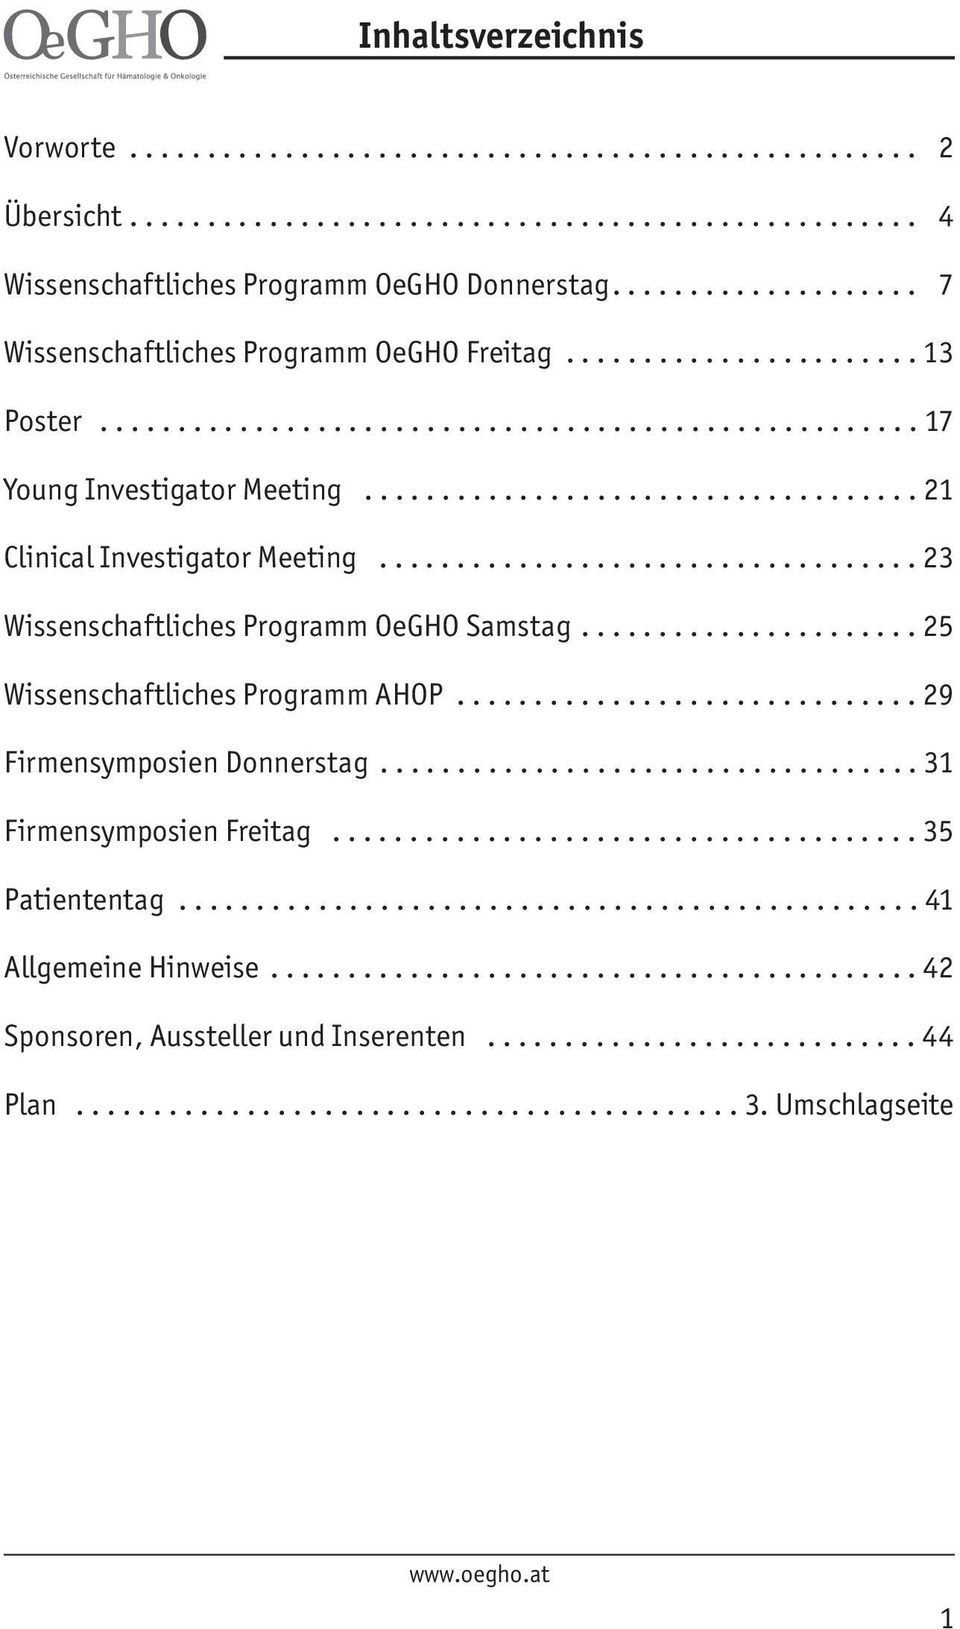 ................................... 21 Clinical Investigator Meeting................................... 23 Wissenschaftliches Programm OeGHO Samstag...................... 25 Wissenschaftliches Programm AHOP.